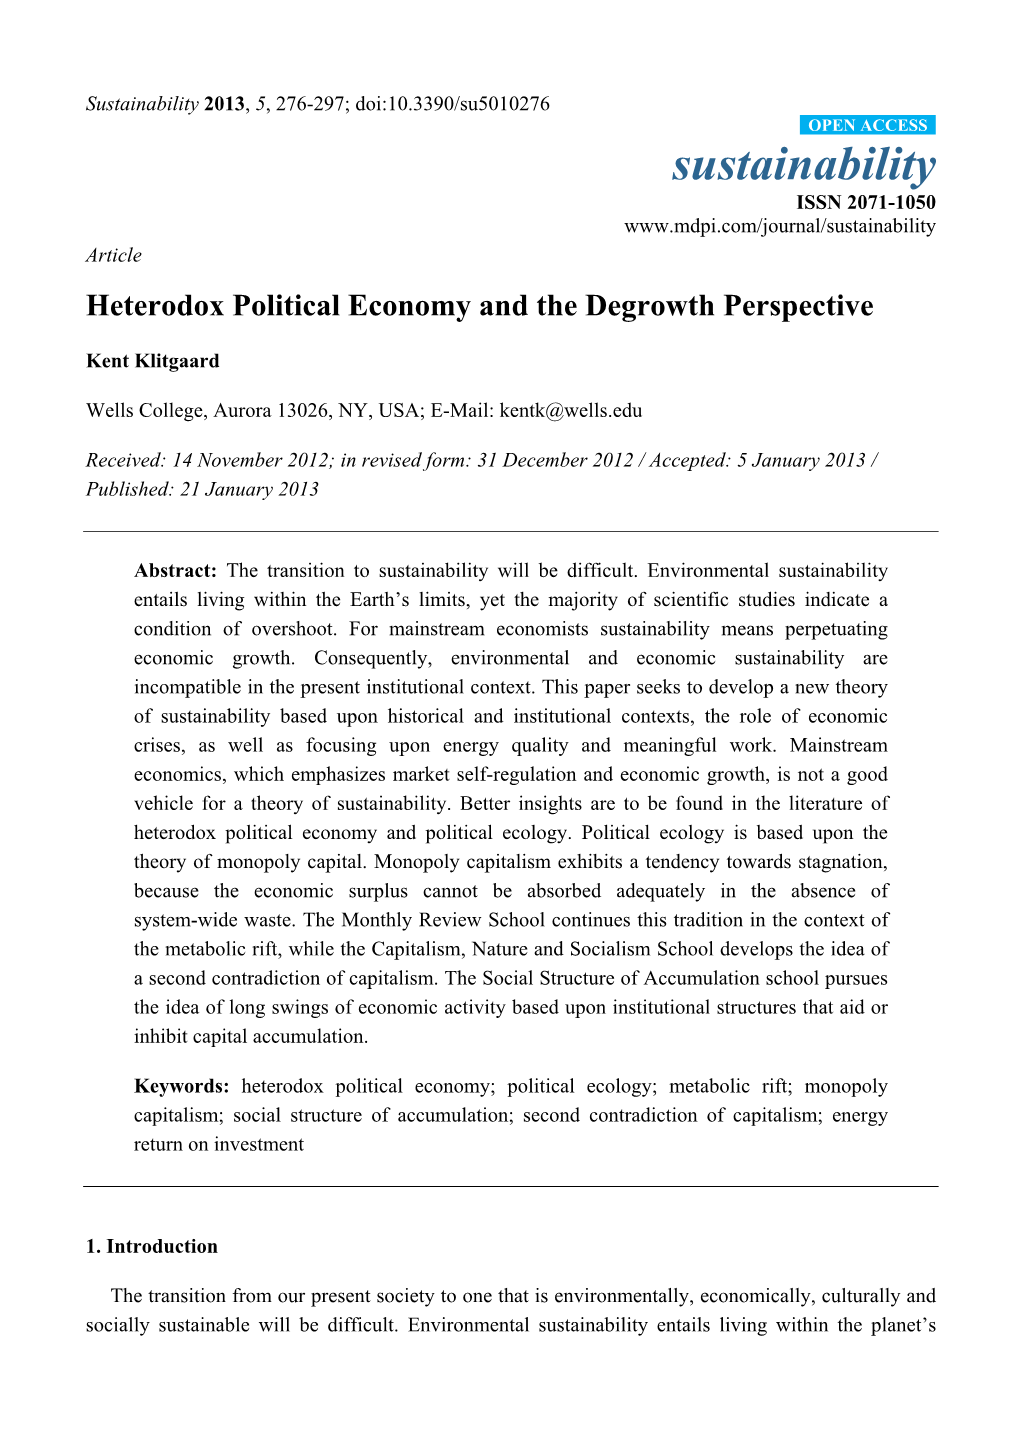 Heterodox Political Economy and the Degrowth Perspective